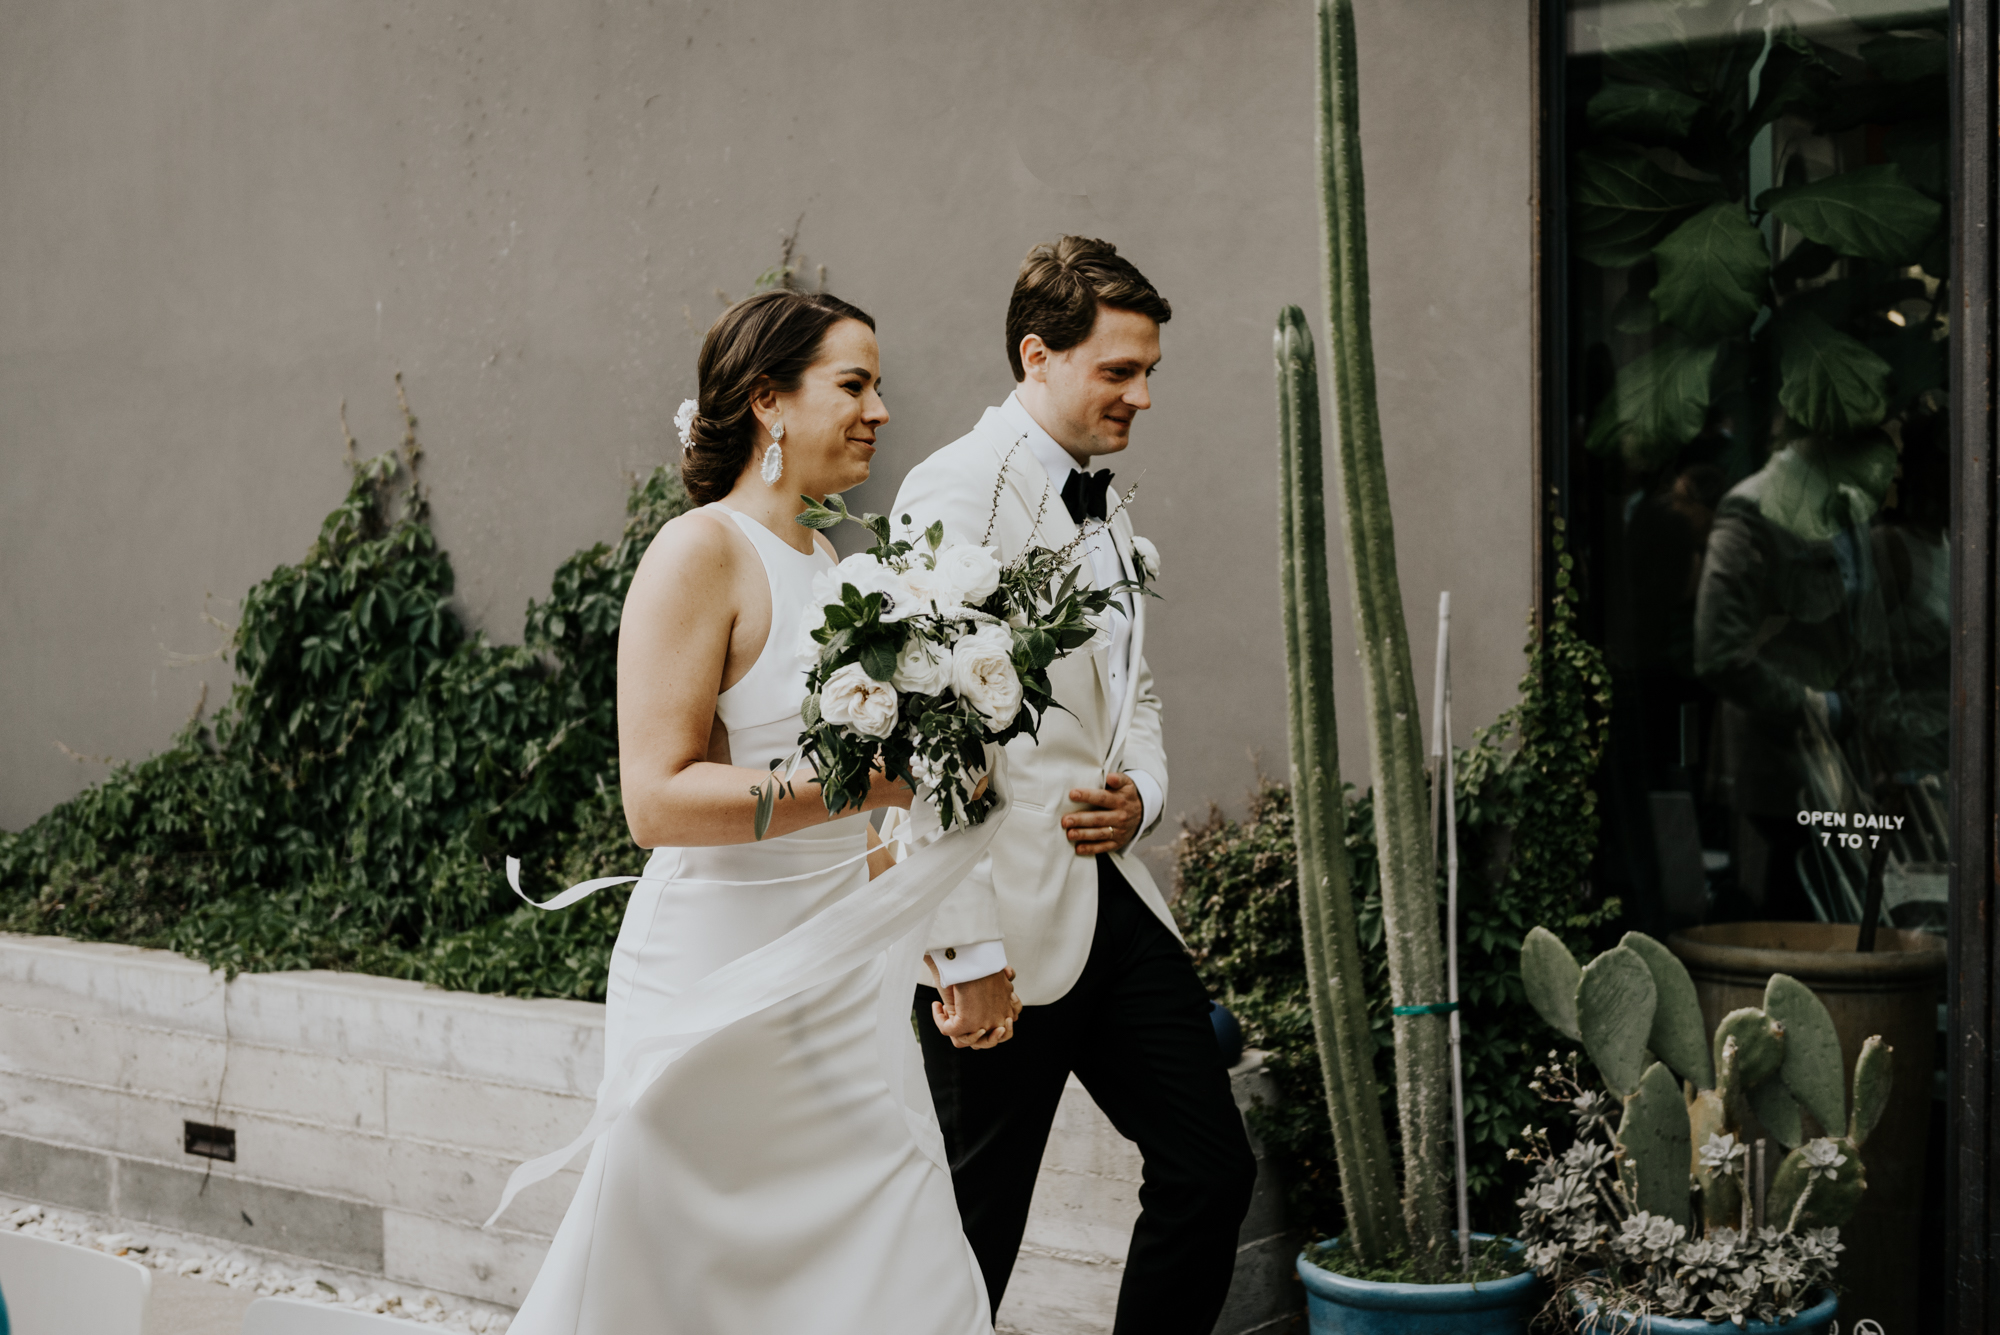 Intimate Wedding at South Congress Hotel in Austin, Texas